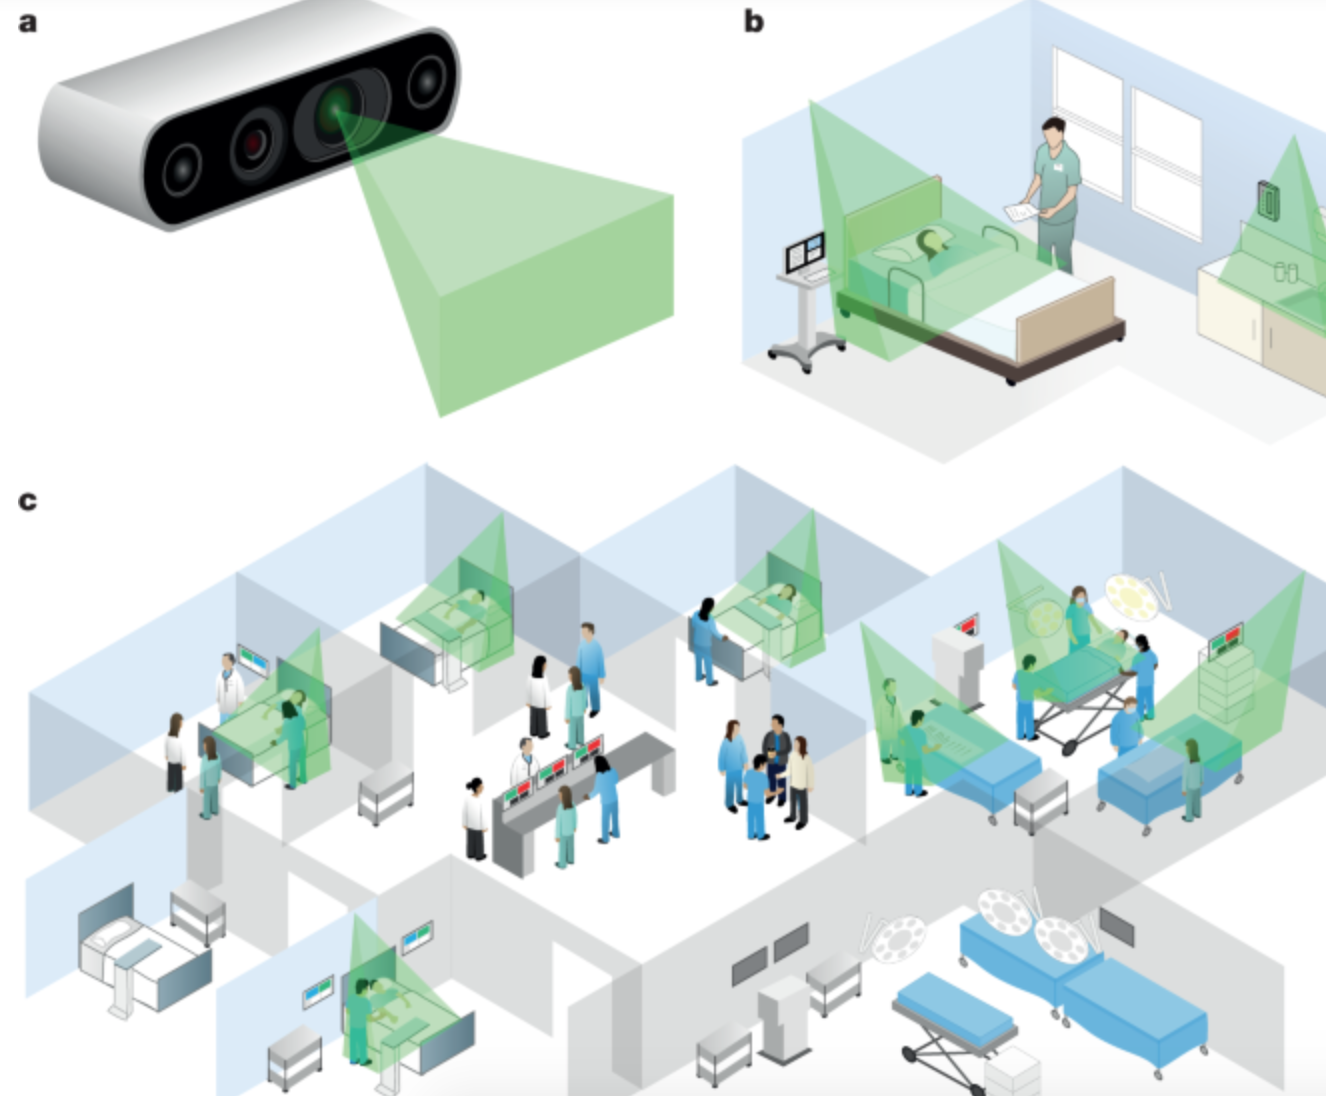 “Ambient intelligence” monitoring to prevent medical errors, send alerts